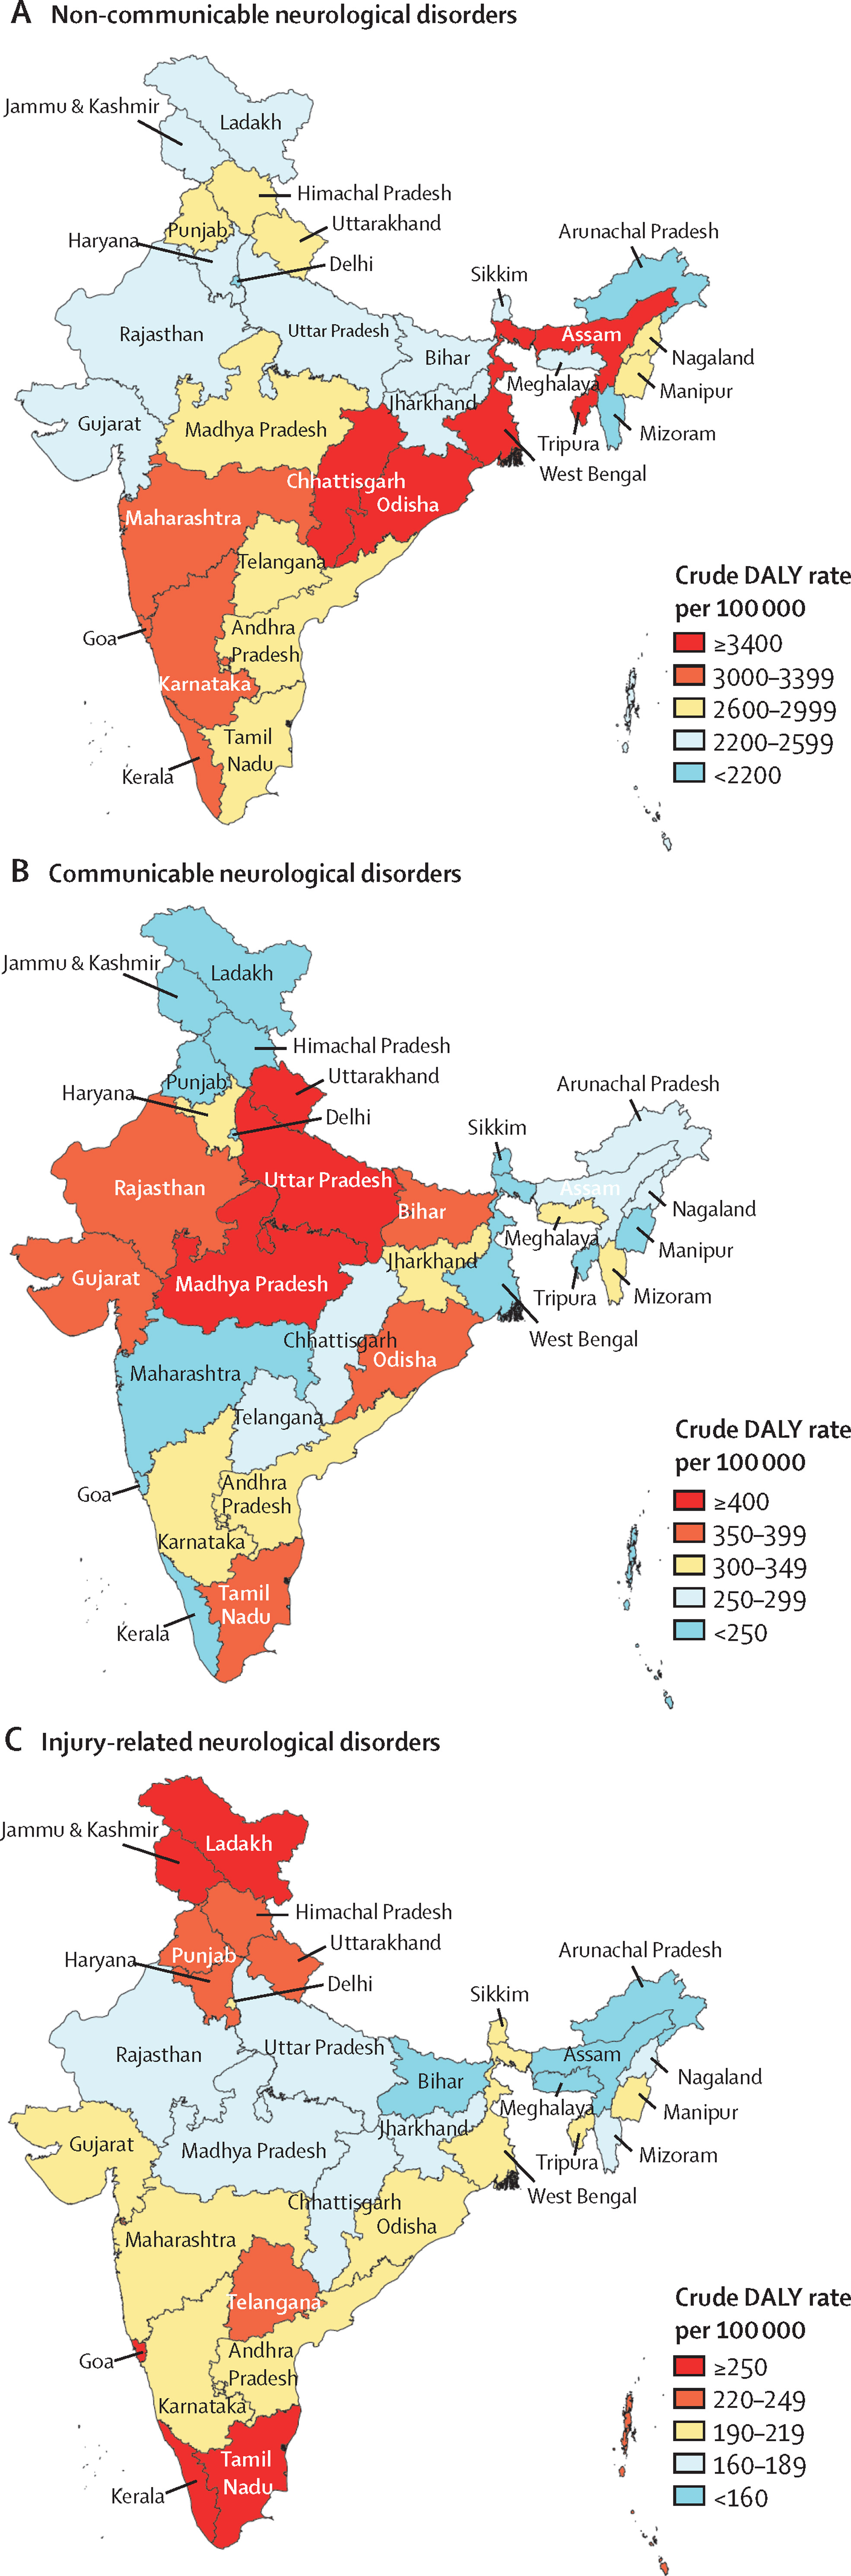 Crude DALY rates of non-communicable, communicable, and injury-related neurological disorders in the states of India, 2019.